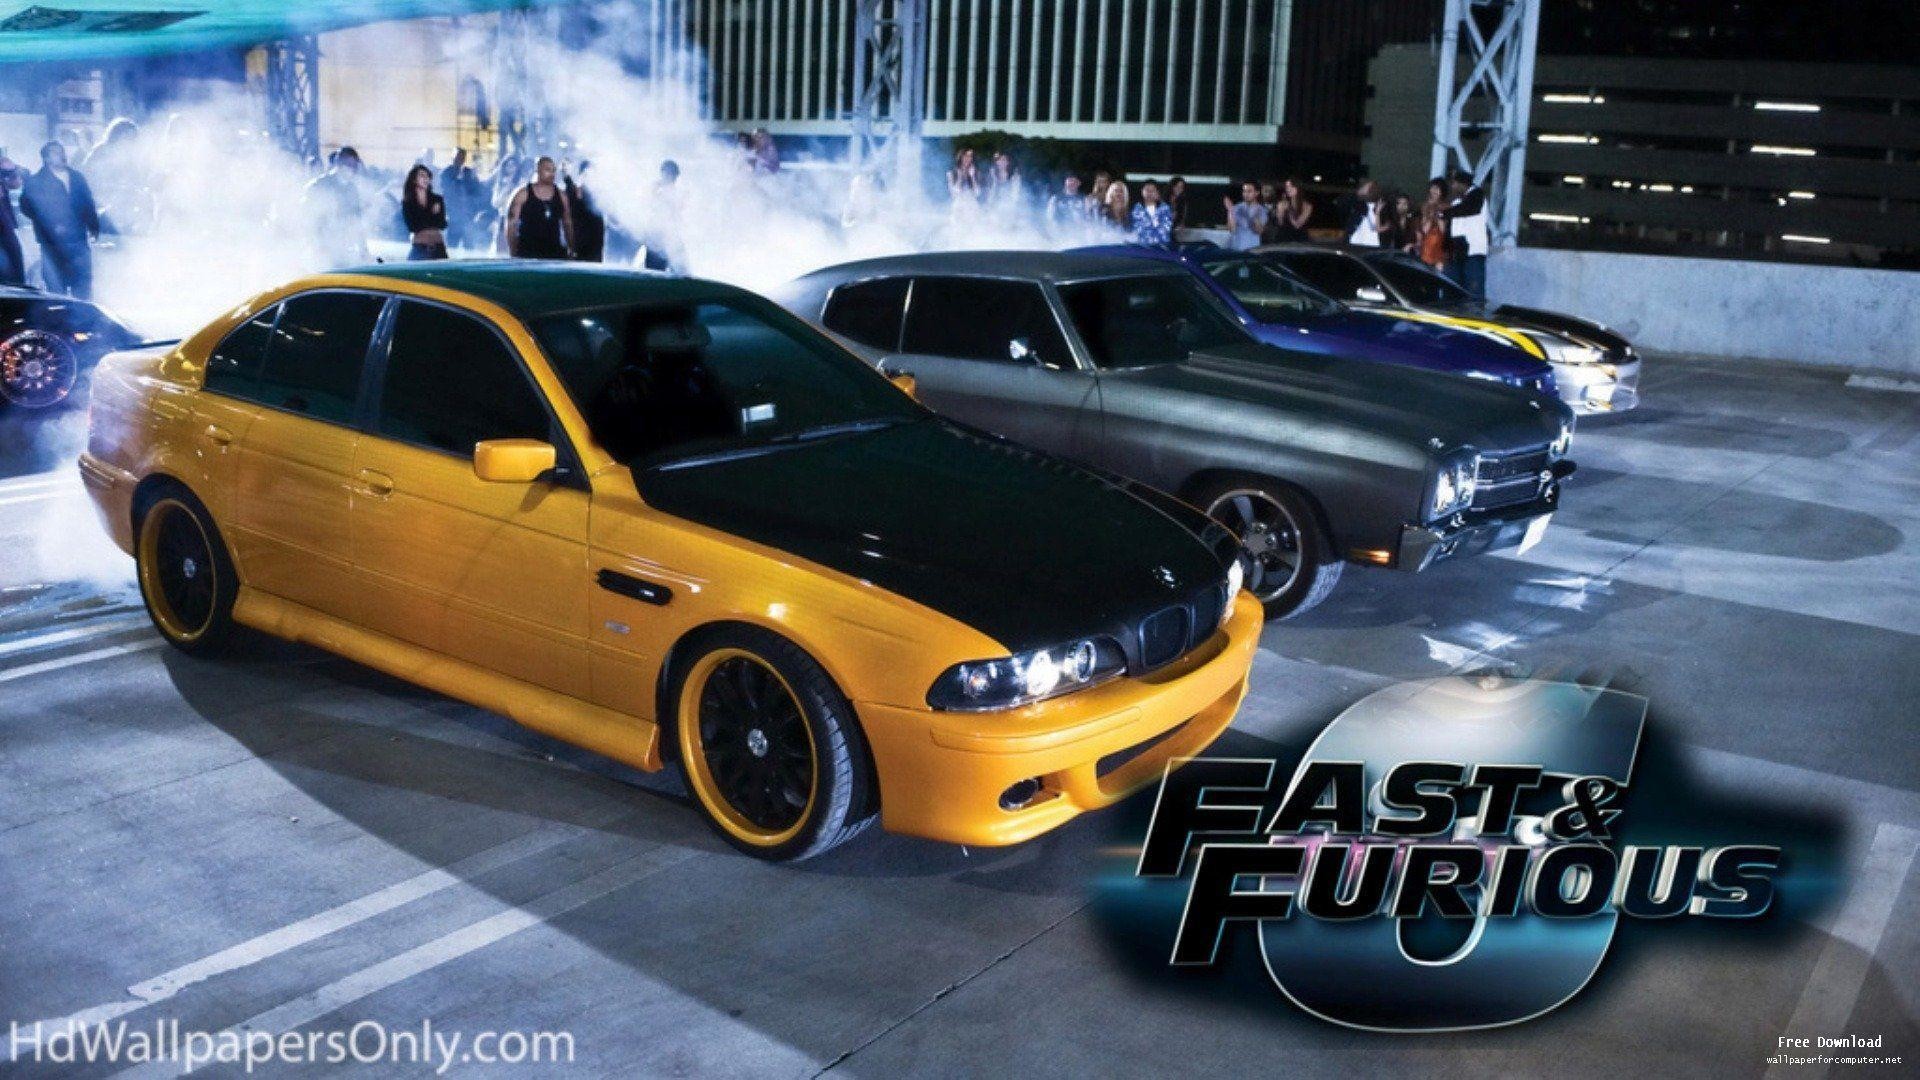 1920x1080 Fast And Furious Cars Wallpapers Hd Cool 7 HD Wallpapers | Planezen.